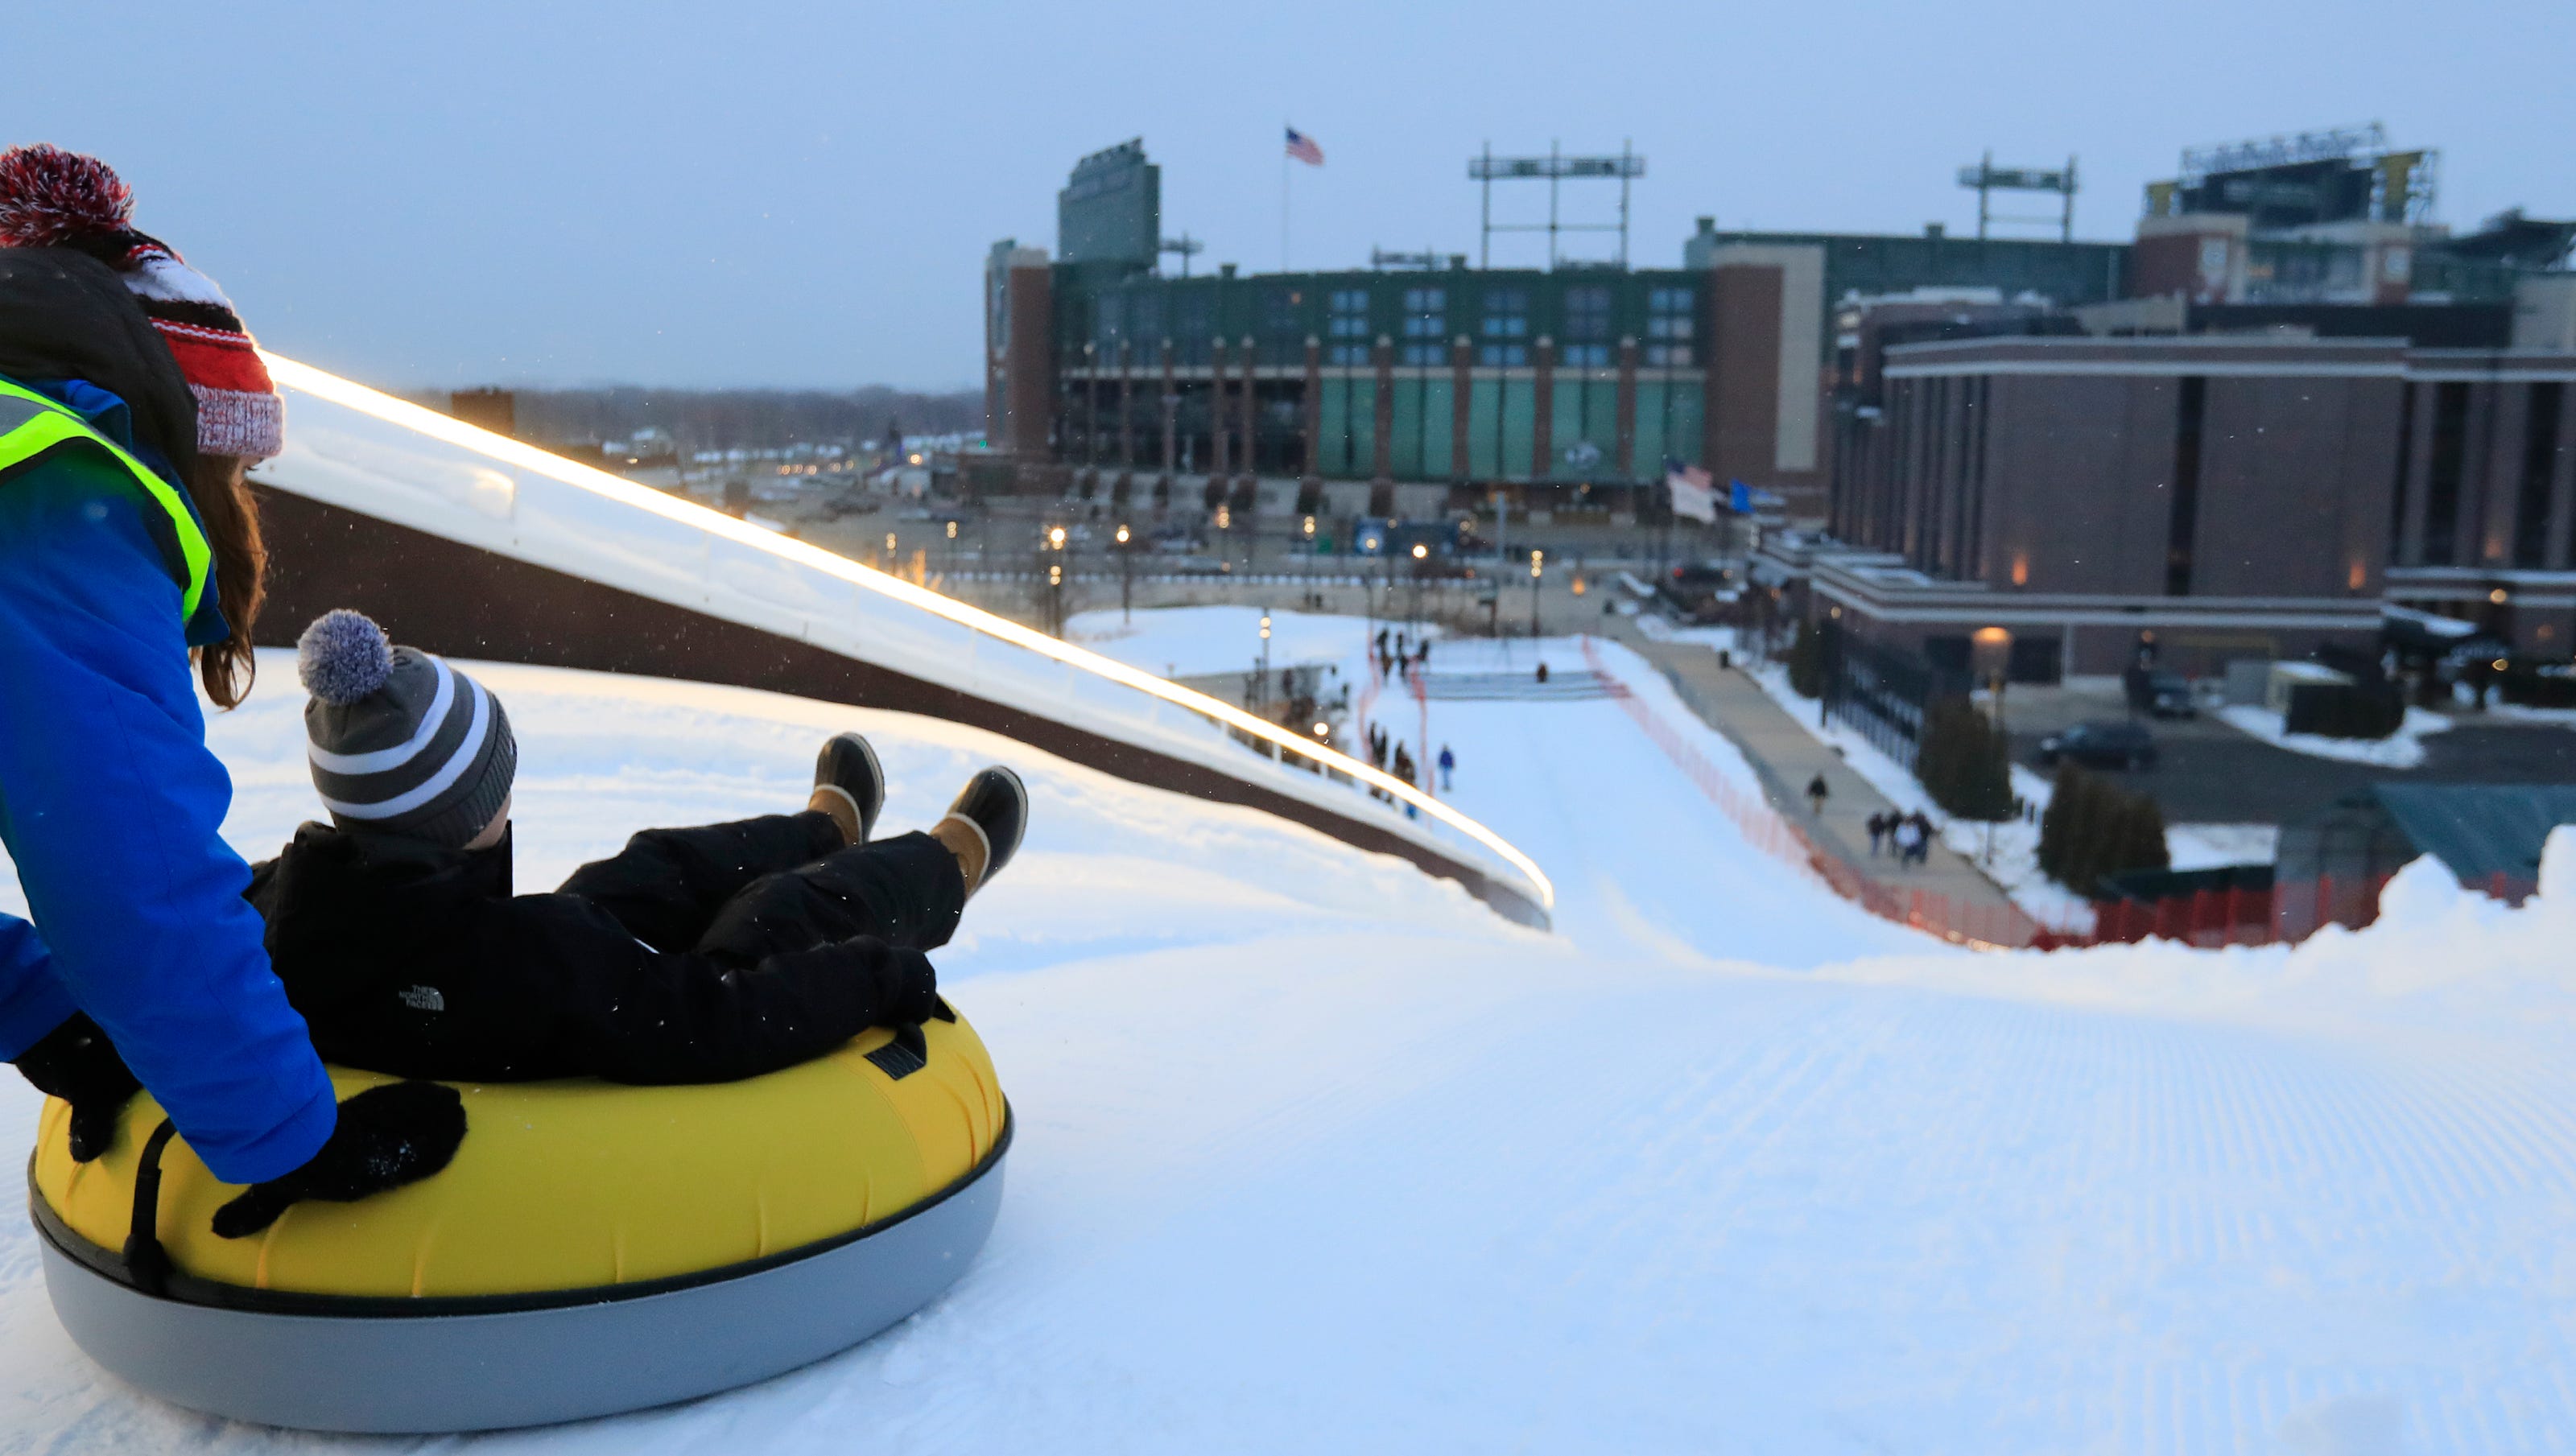 10 fun things to do in Green Bay this winter